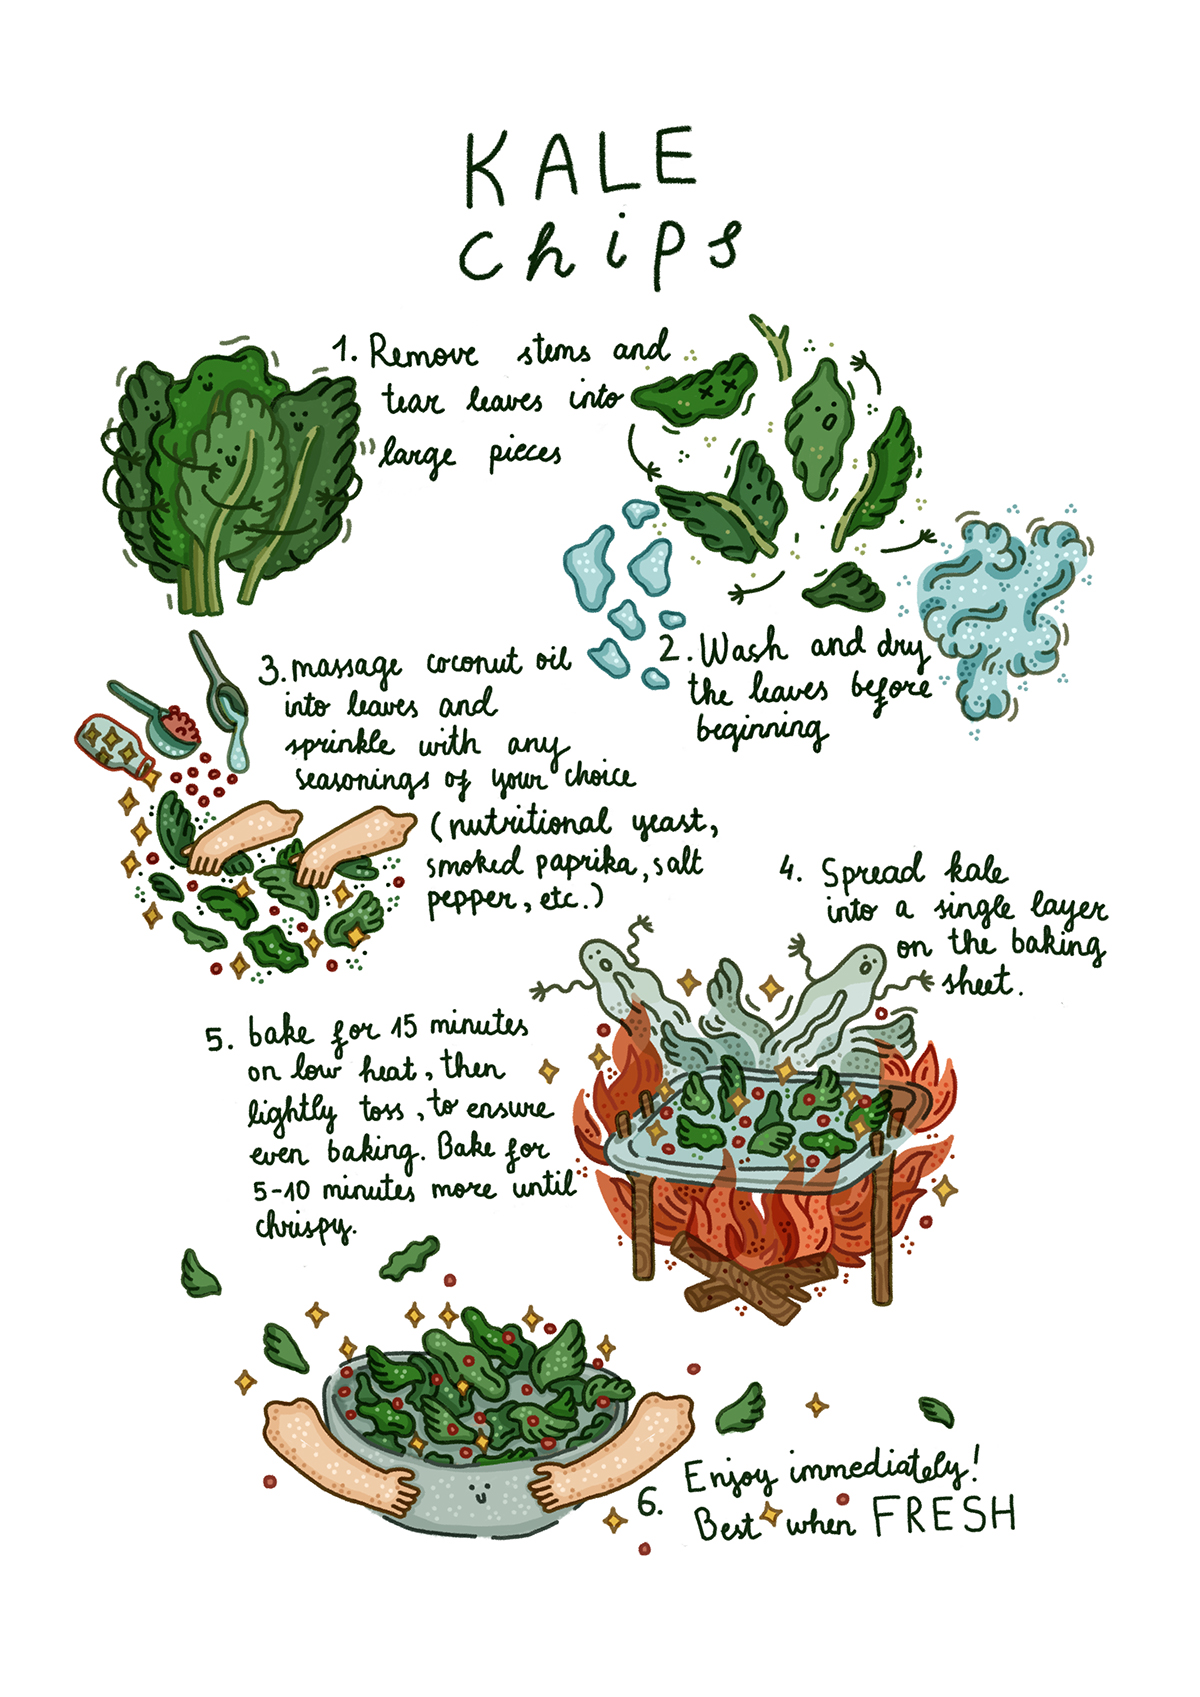 Plant plantbased ILLUSTRATION  recipe Character cooking editorial magazine